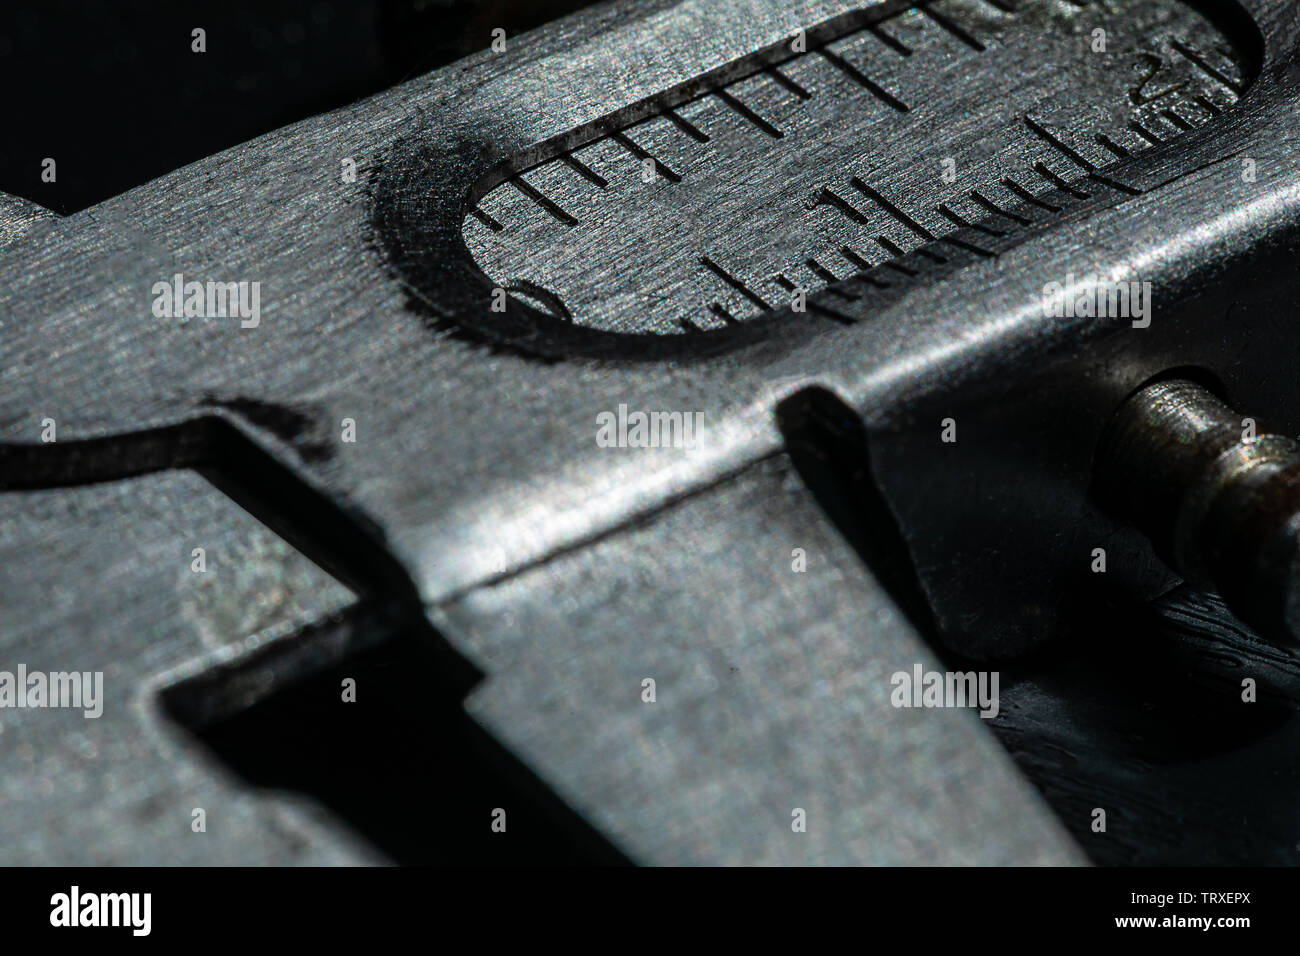 Macro Image of a carpenter's caliper.  The tool is obviously well used and an important tool to the owner. Stock Photo